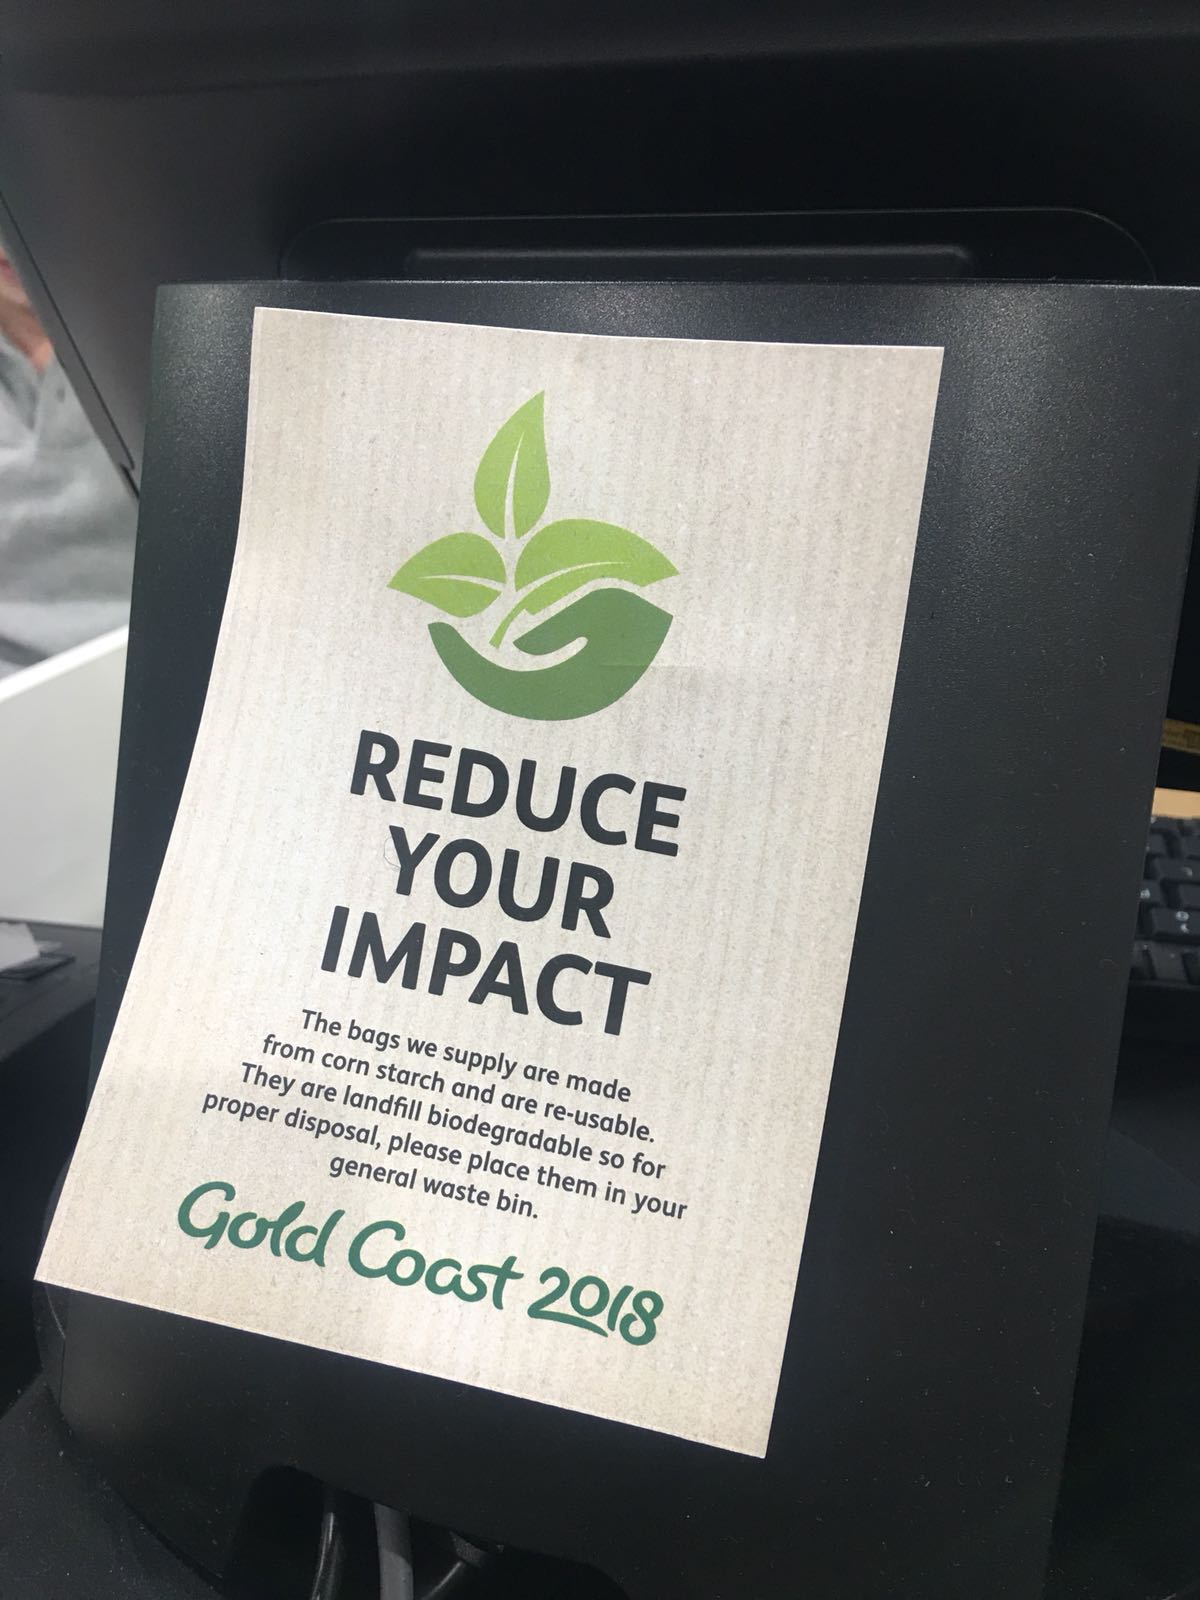  Biodegradable, re-usable bags on offer to attendees at the Gold Coast Commonwealth Games 2018. 